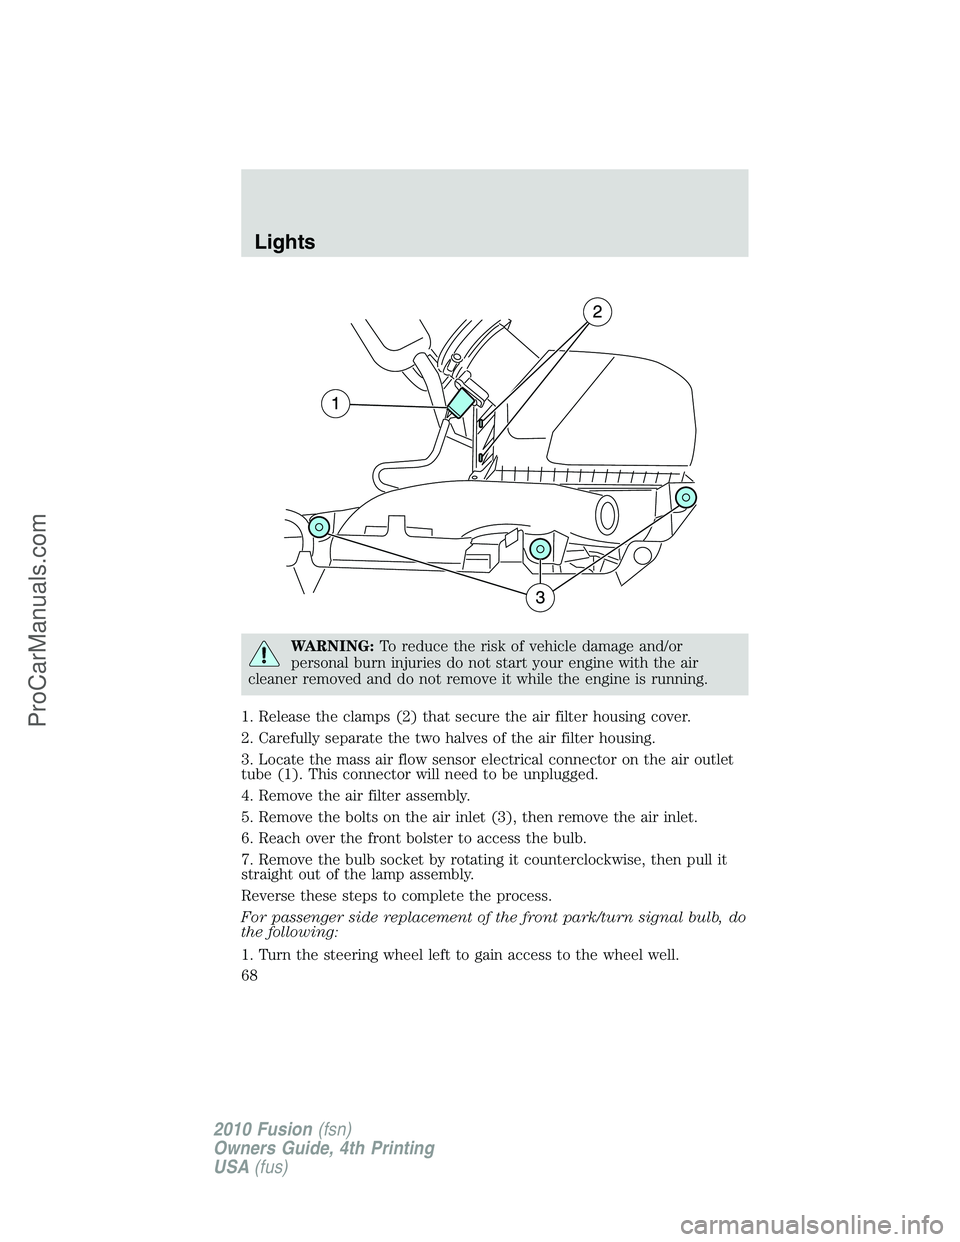 FORD FUSION 2010 Repair Manual WARNING:To reduce the risk of vehicle damage and/or
personal burn injuries do not start your engine with the air
cleaner removed and do not remove it while the engine is running.
1. Release the clamps